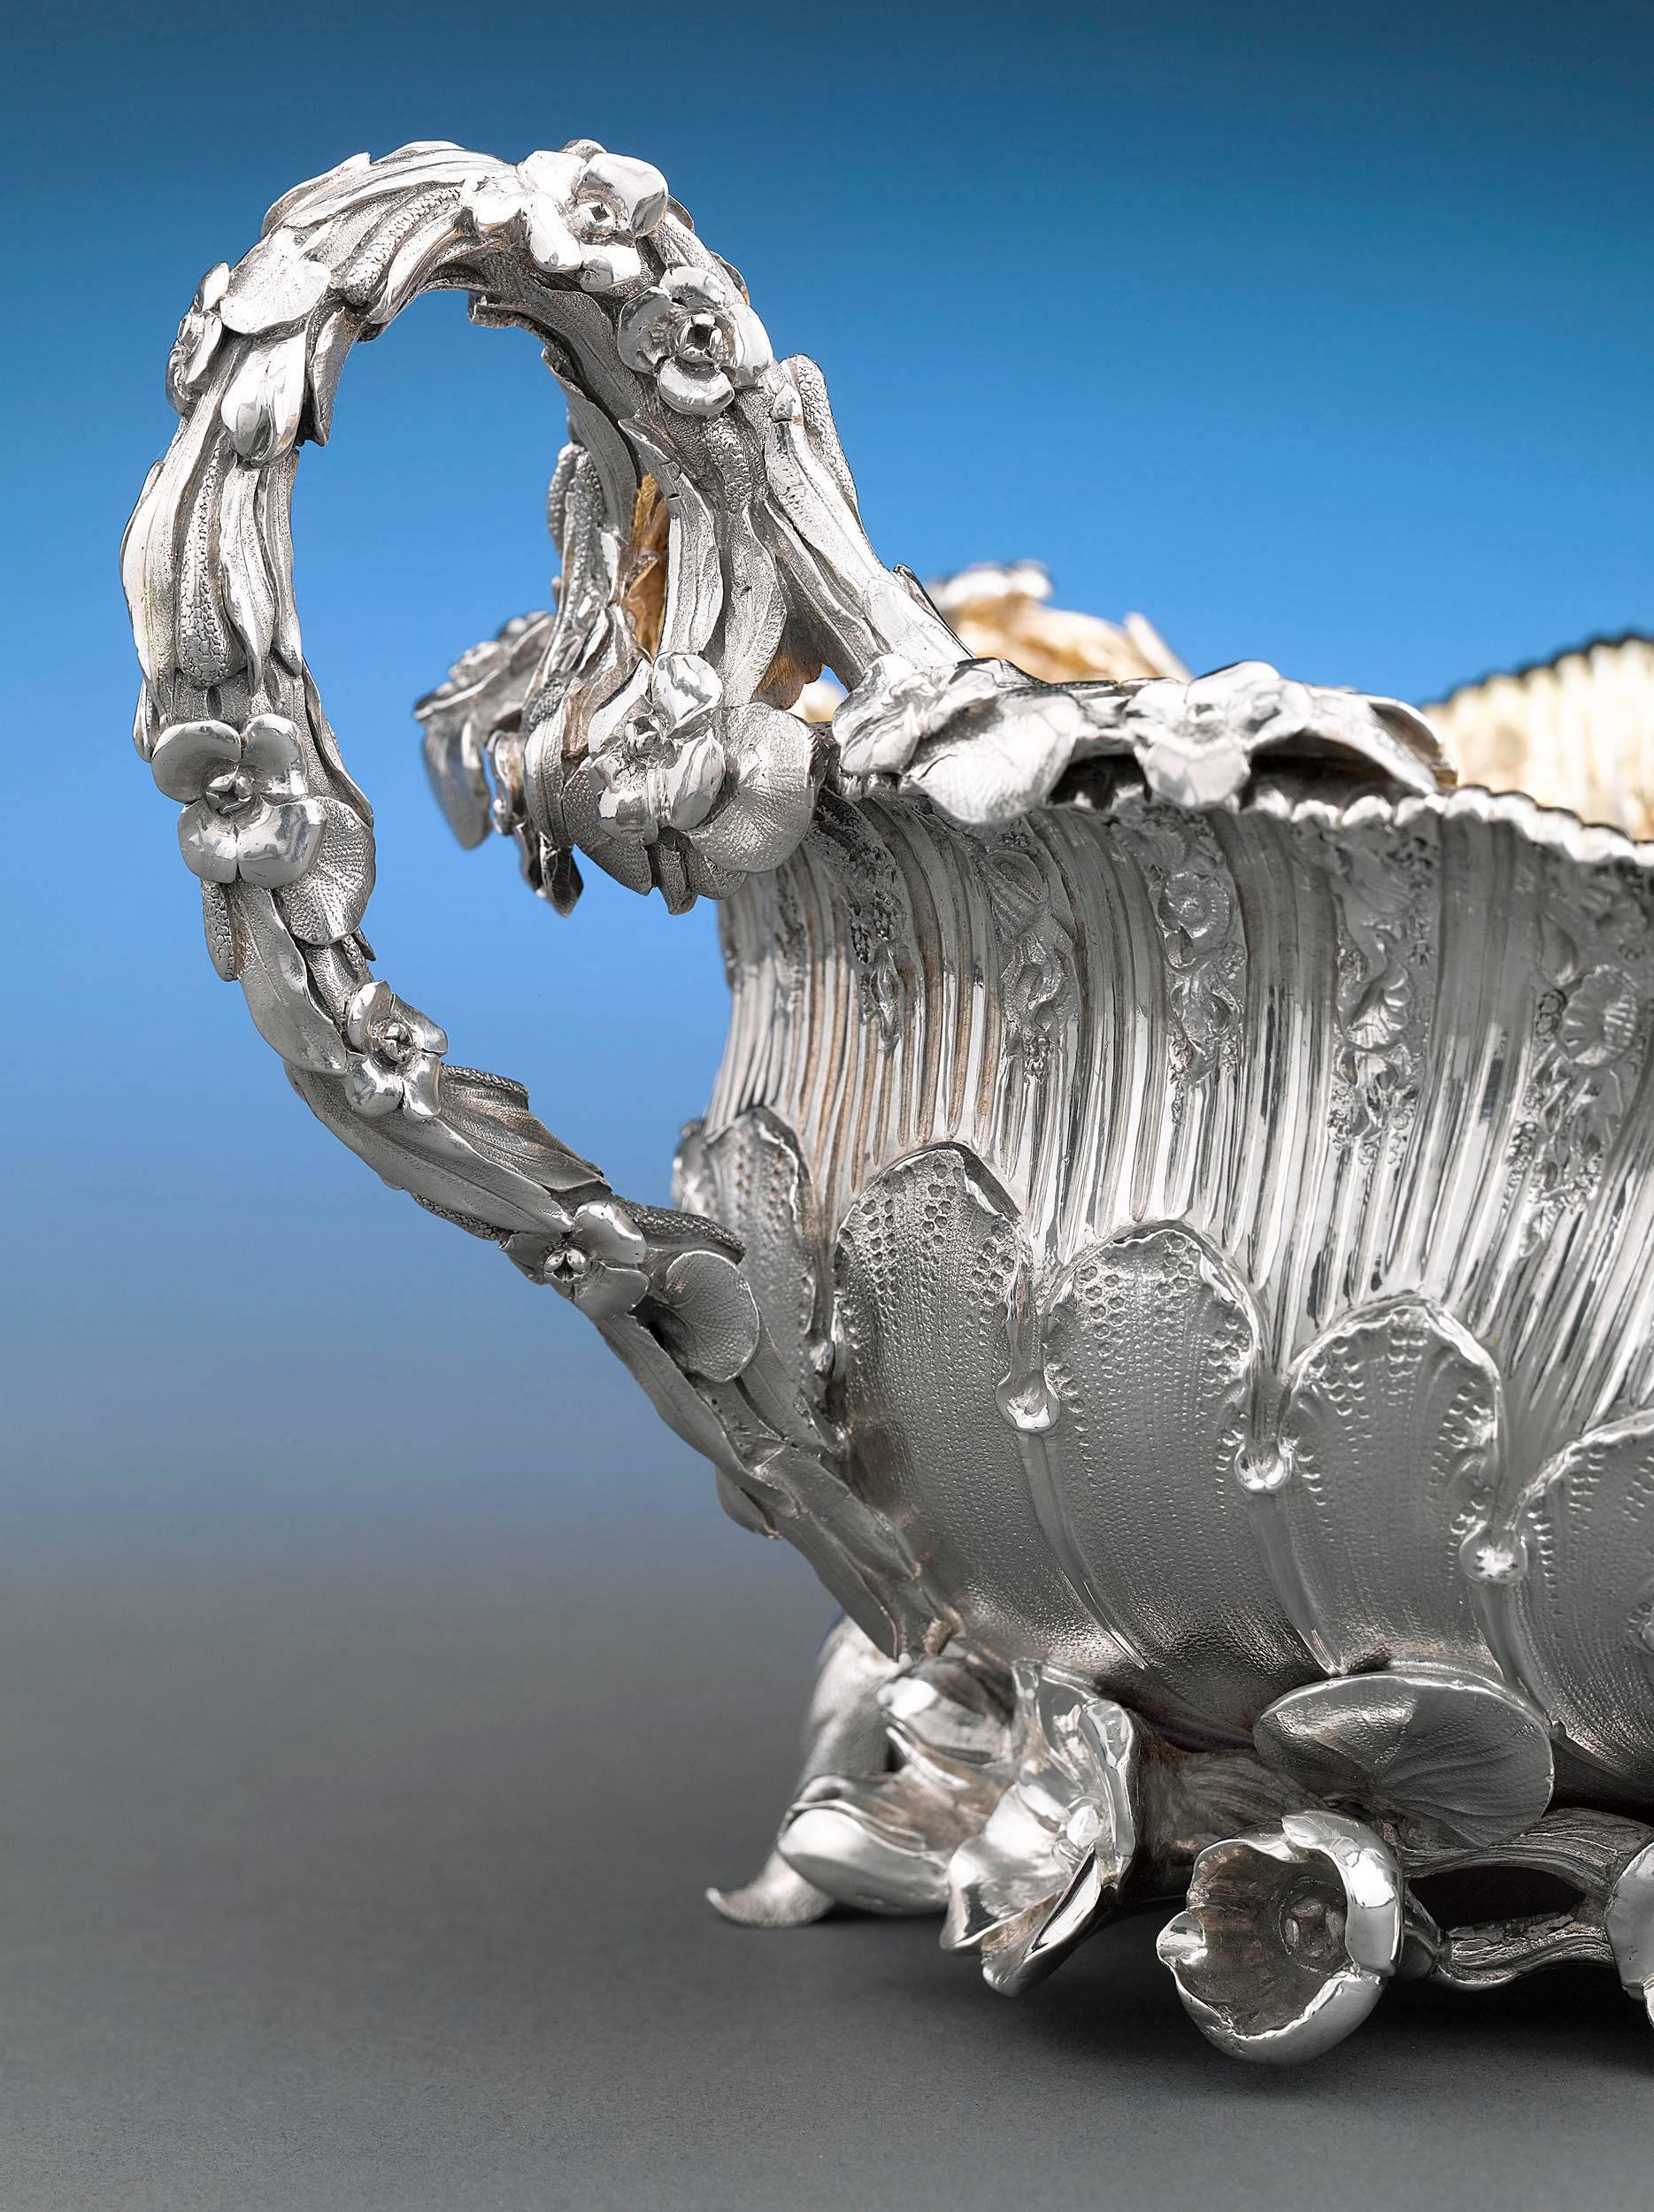 This exquisite George IV period silver sugar bowl by the celebrated Benjamin Smith is crafted in an exuberant Rococo style. From the floral and foliate handles to the delicately engraved armorial, this is a work of true genius. A gilt